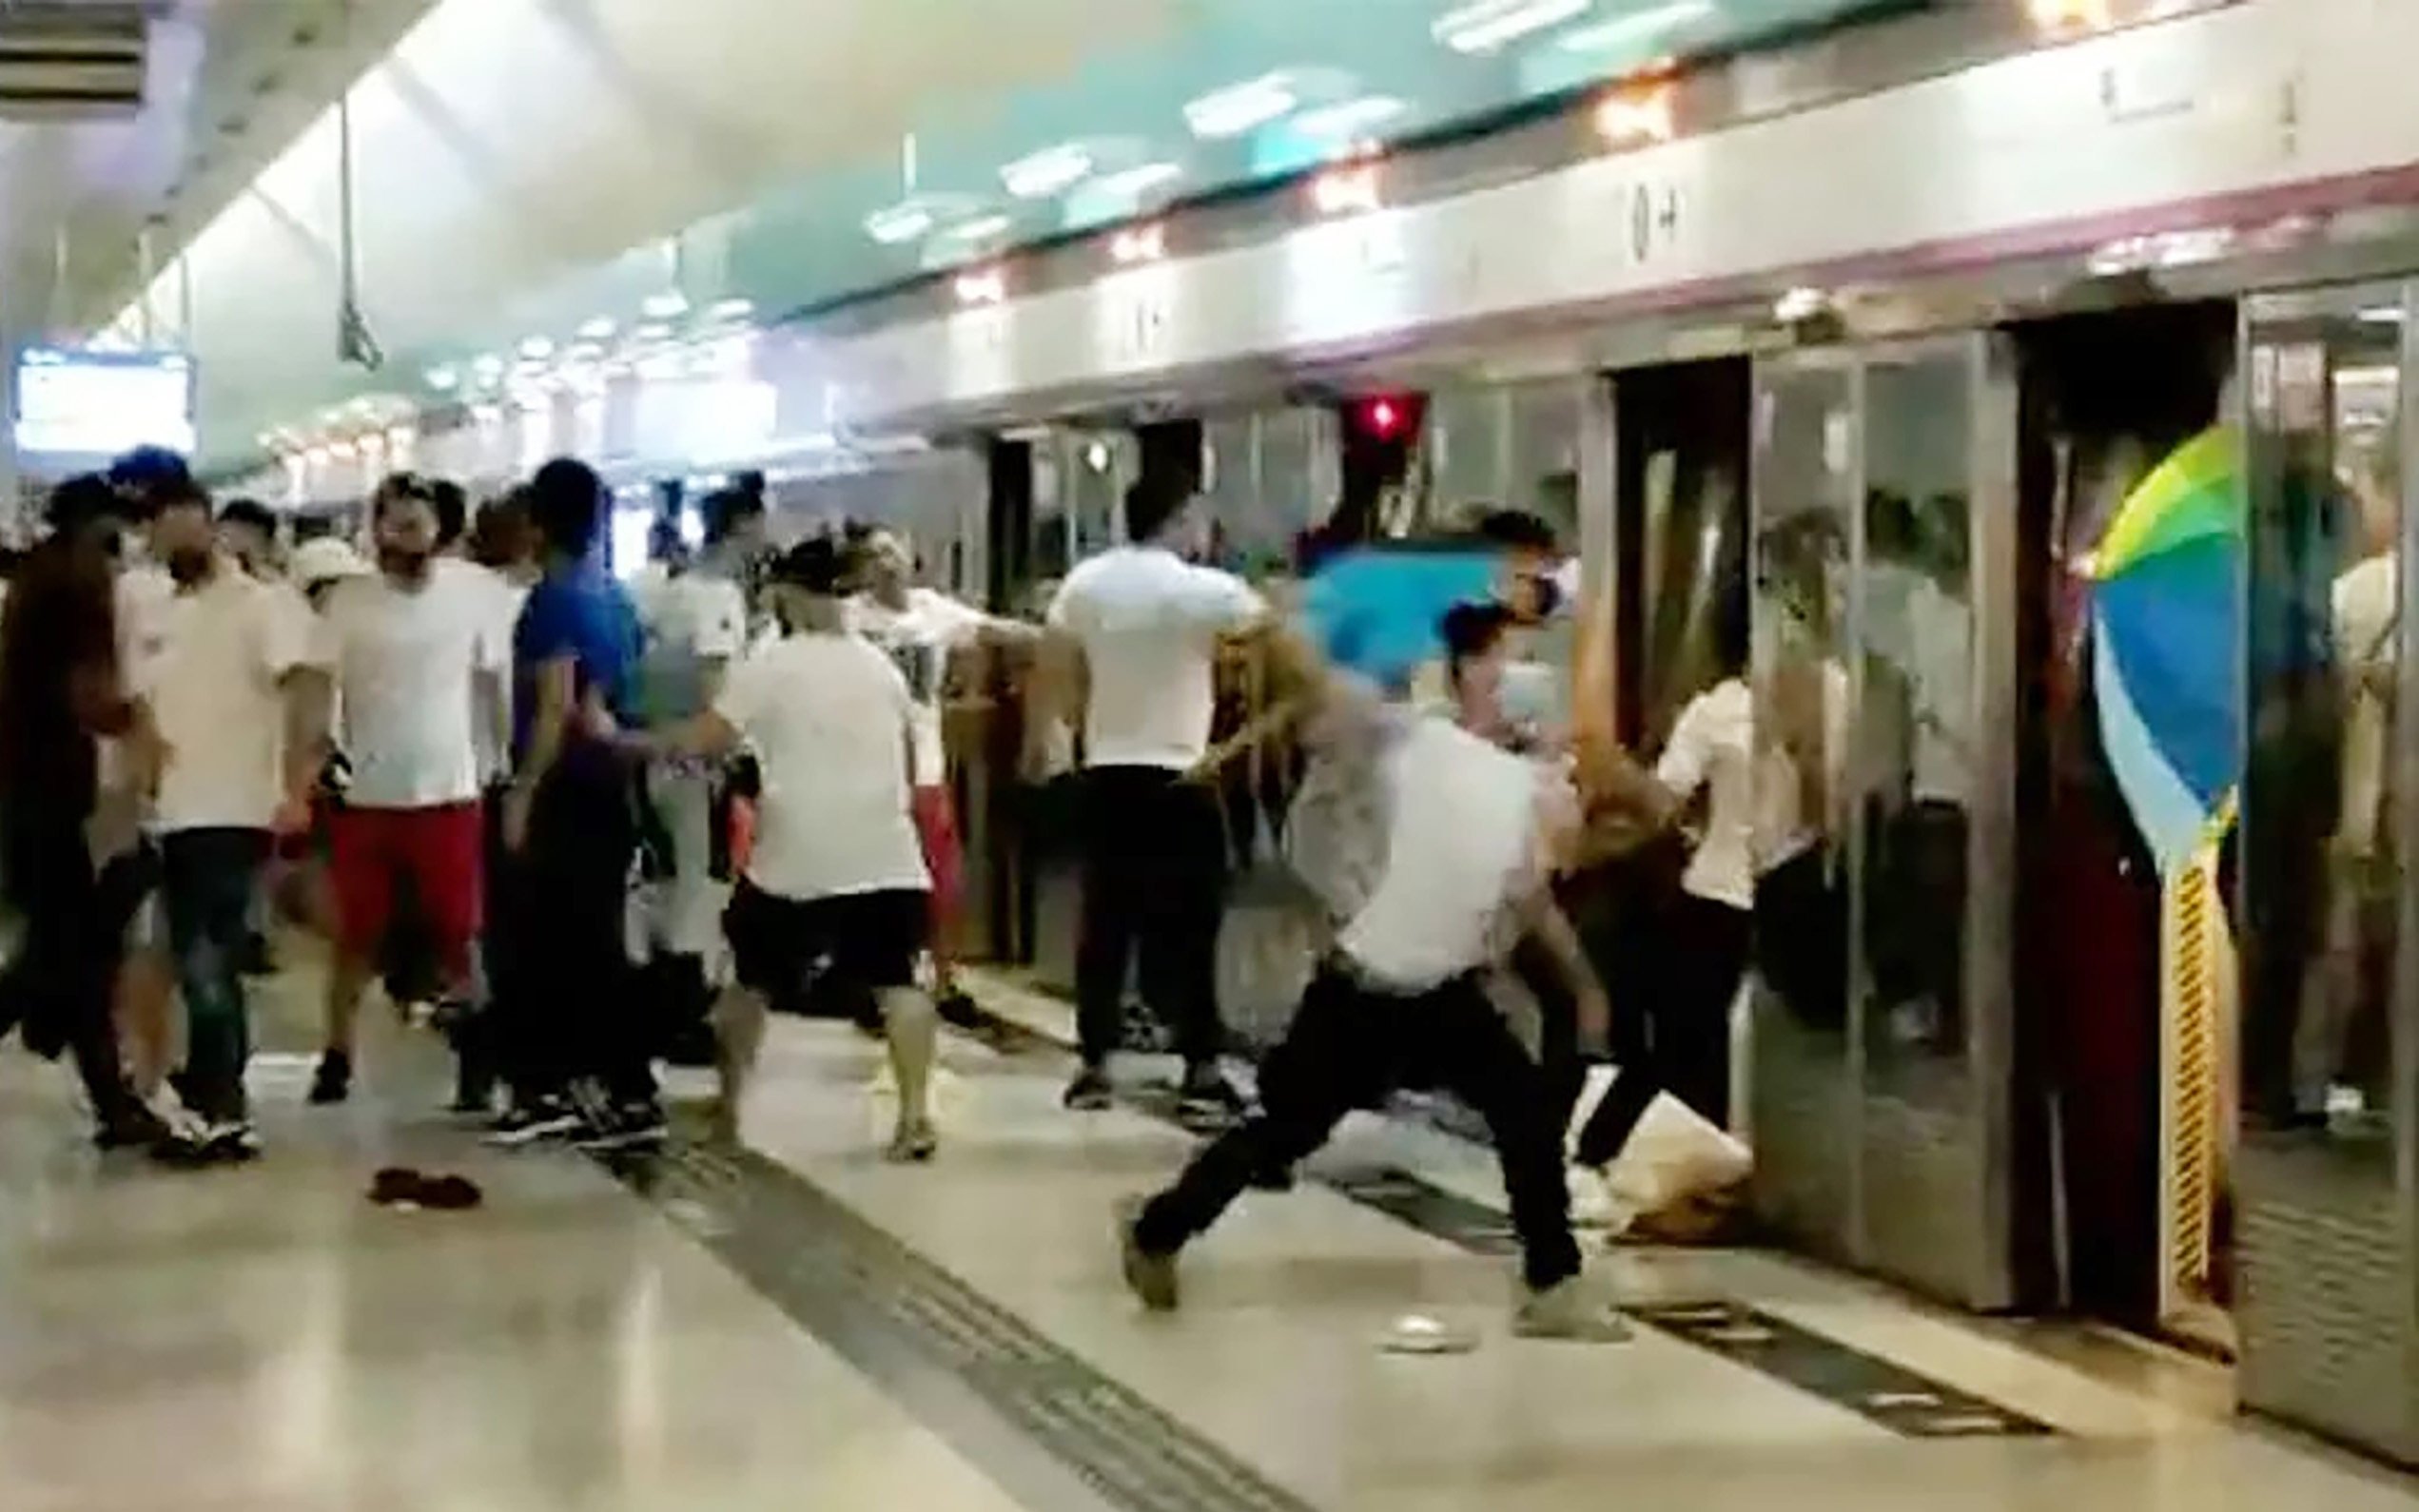 The ringleaders of the thwarted bomb plot bonded over their shared desire to get revenge for an attack on protesters and passengers at the Yuen Long MTR station in July 2019, a court has heard.